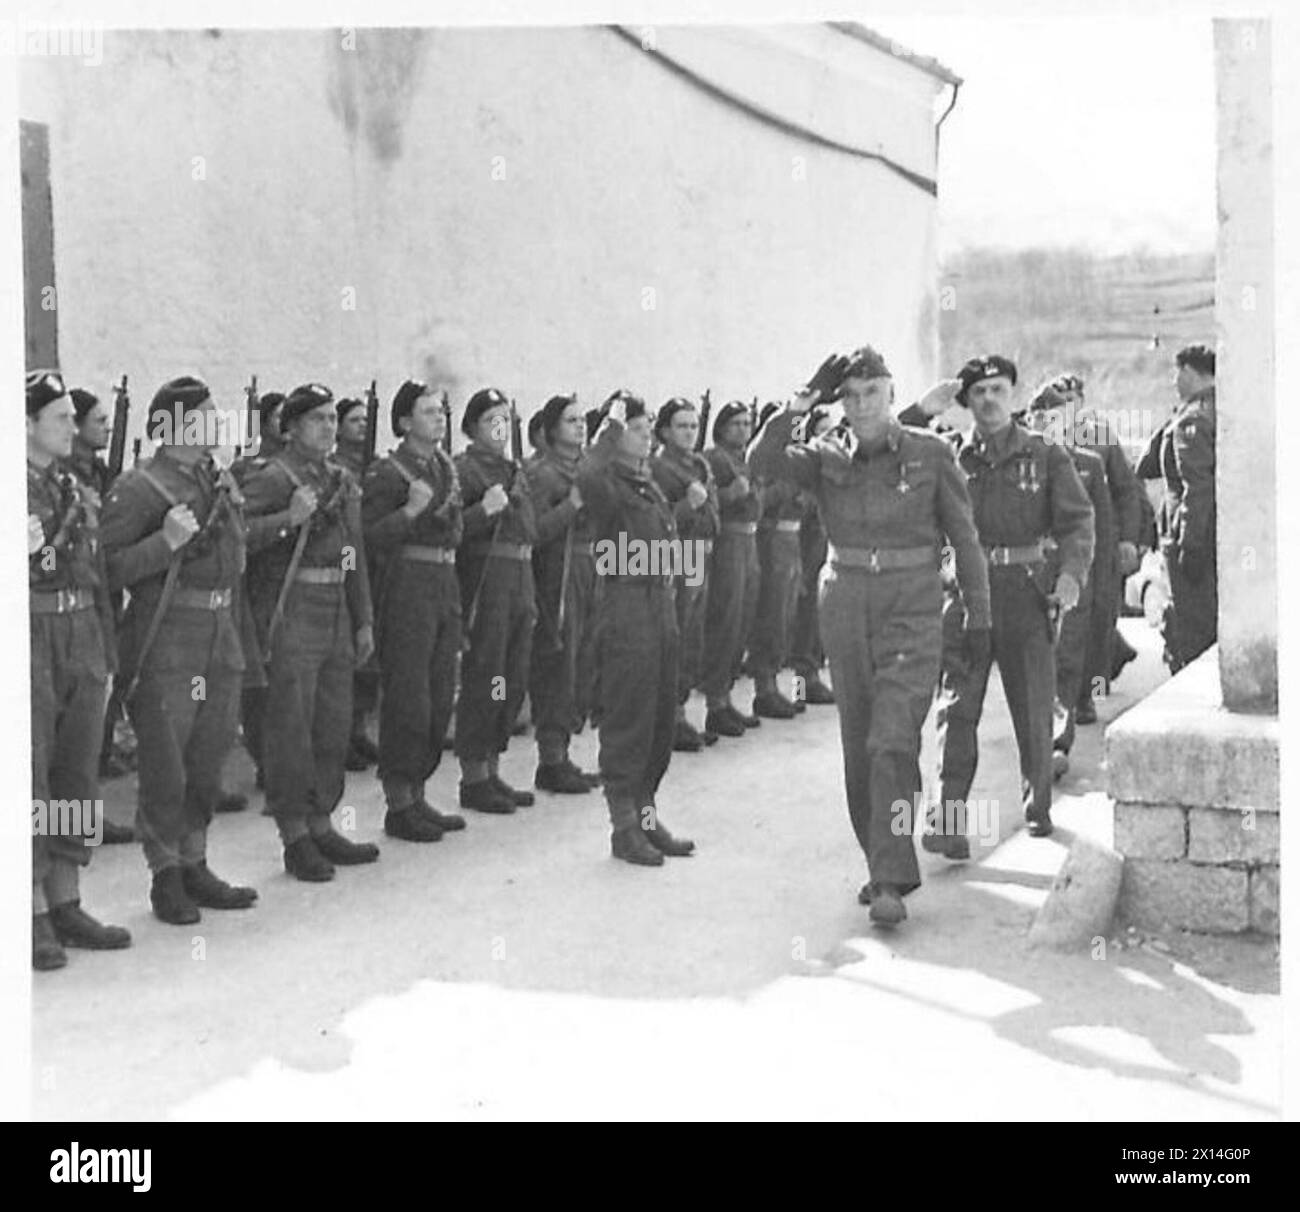 THE POLISH ARMY IN THE ITALIAN CAMPAIGN, 1943-1945 - General Kazimierz Sosnkowski, the C-in-C of the Polish Armed Forces, inspecting troops of one of the units of 2nd Polish Corps during his visit to the formation. Generals Władysław Anders, the Commander of the 2nd Corps, Stanisław Kopański, the Chief of the Polish General Staff, and Zygmunt Bohusz-Szyszko, the Deputy Commander of the Corps, are walking behind in a single line.Photograph taken at Carpinone, 2 April 1944 Polish Army, Polish Armed Forces in the West, Polish Corps, II, 8th Army, Sosnkowski, Kazimierz, Anders, Władysław, Kopański Stock Photo